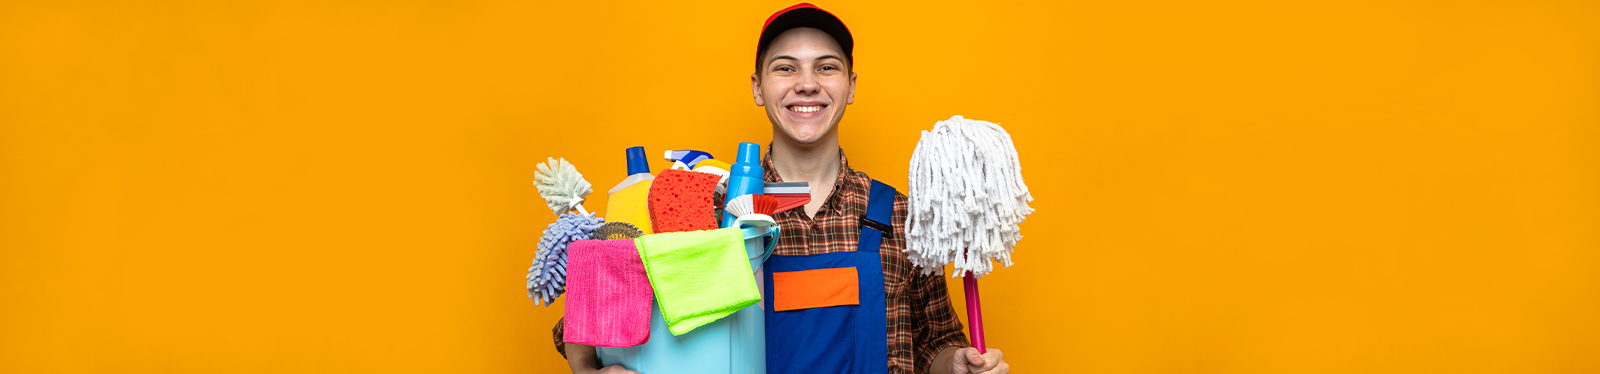 Cleaning & Household supplies